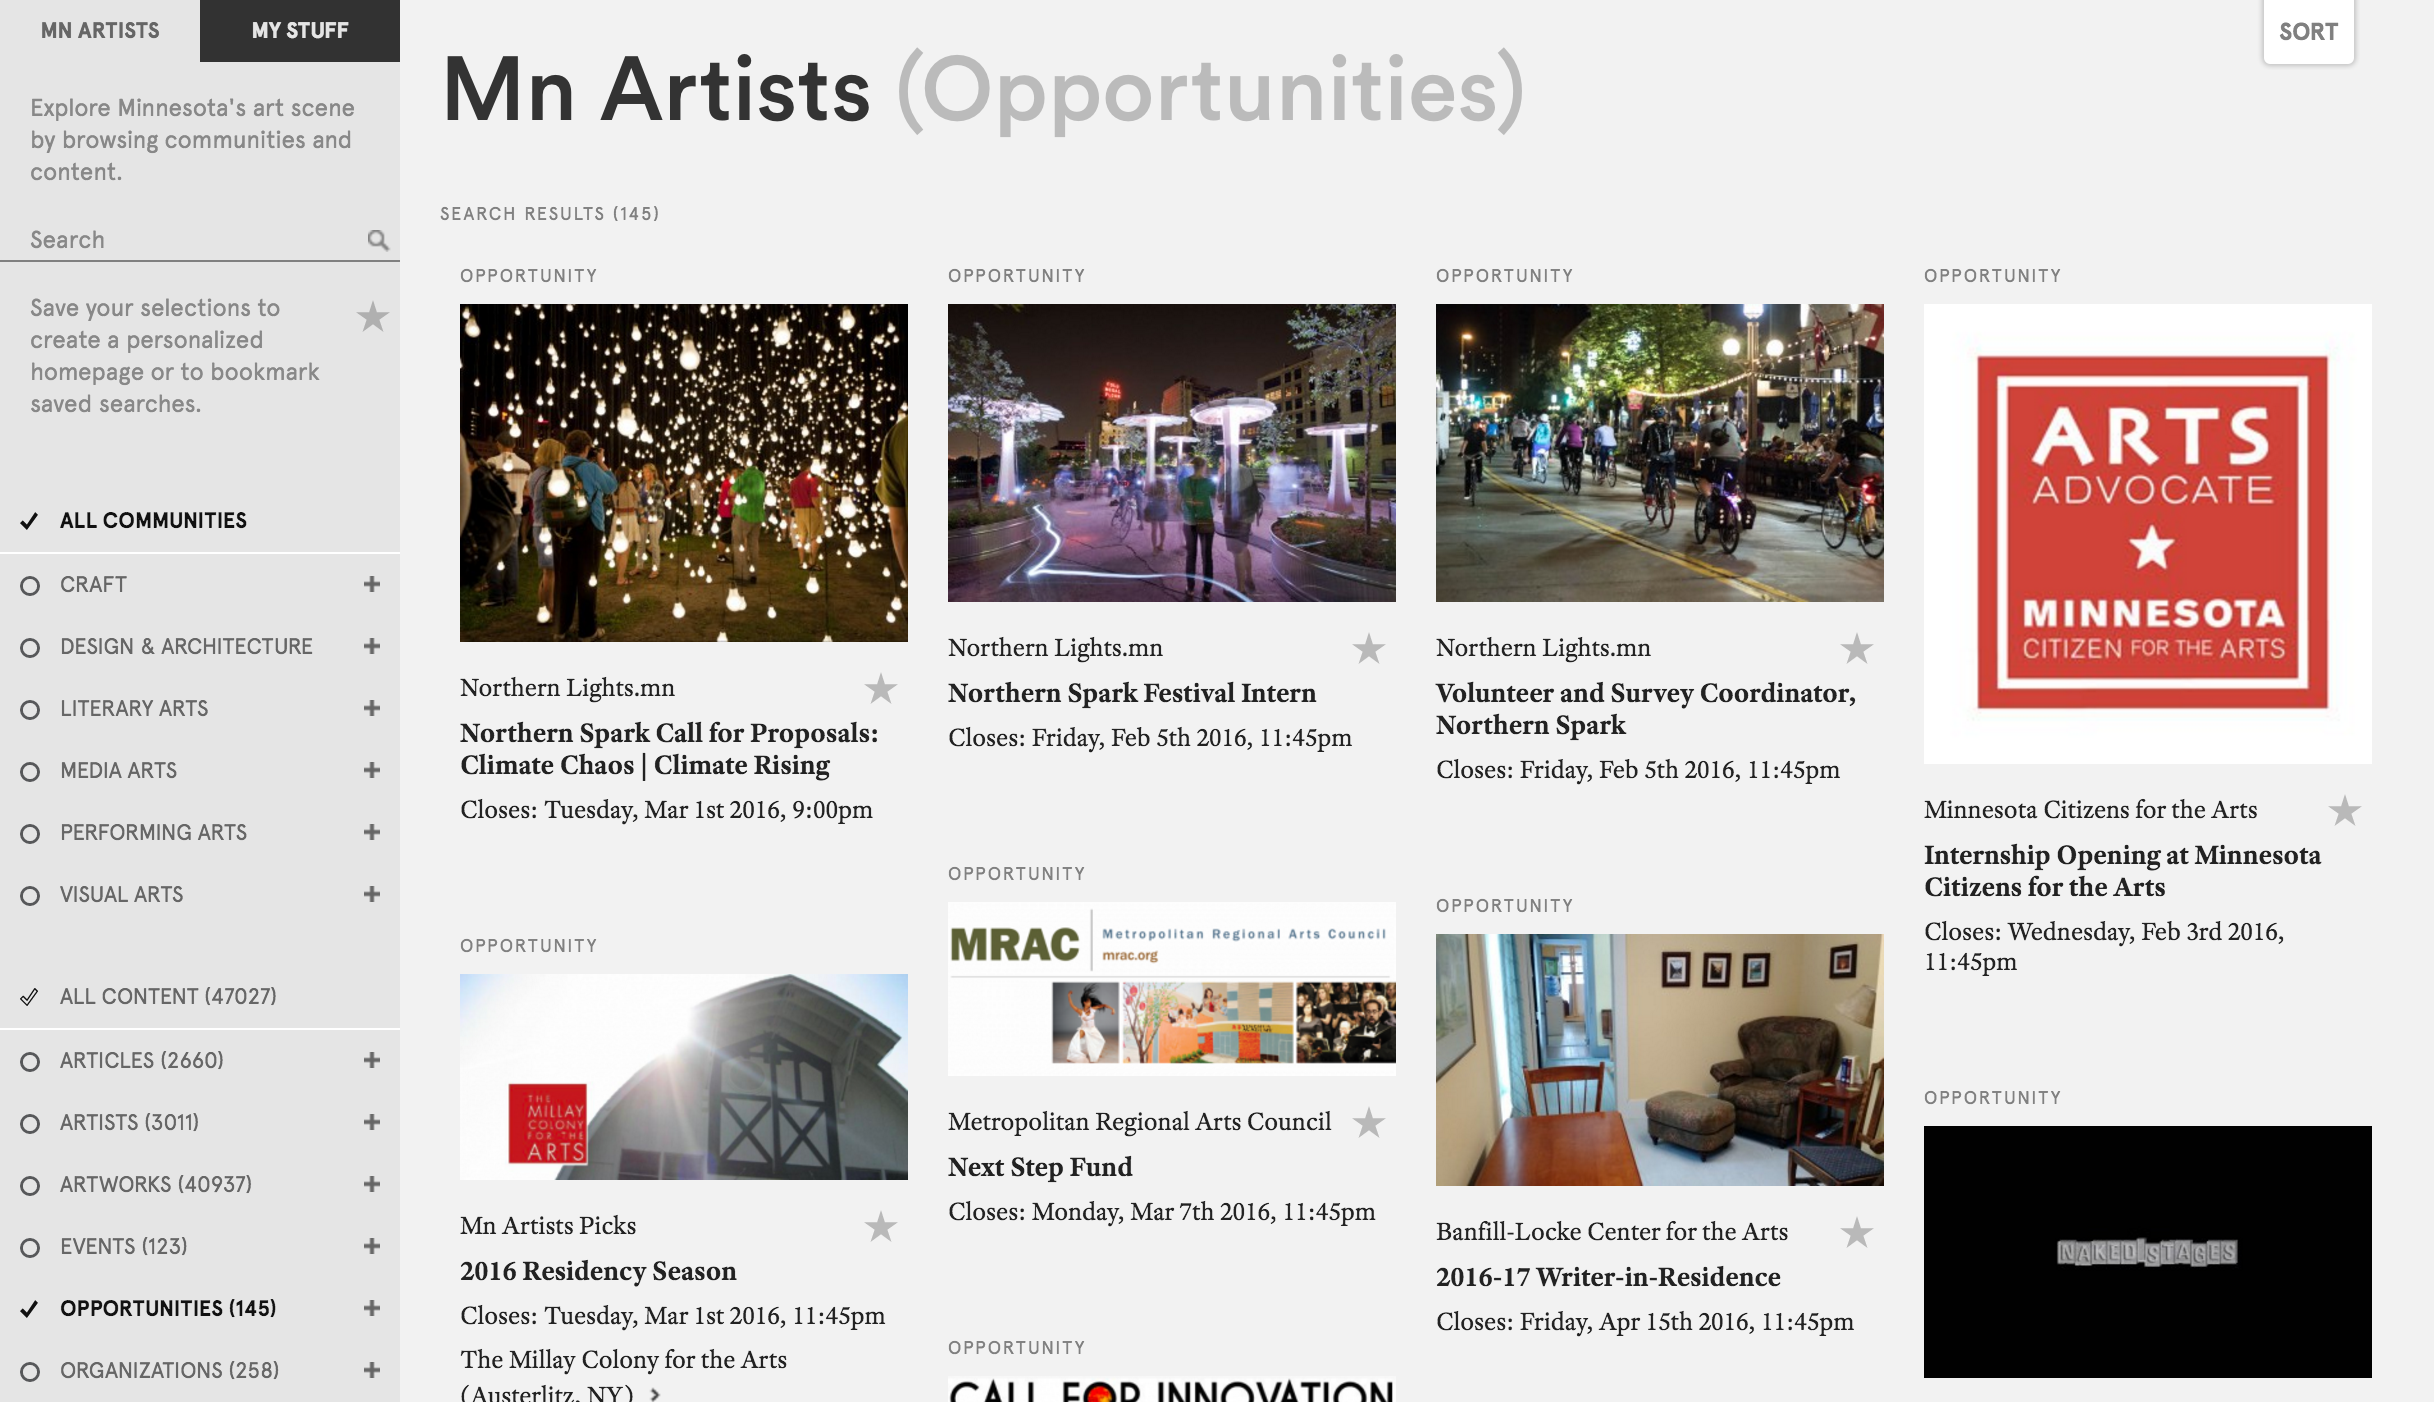 Figure 6: Mn Artists, content filtered by “Opportunities”